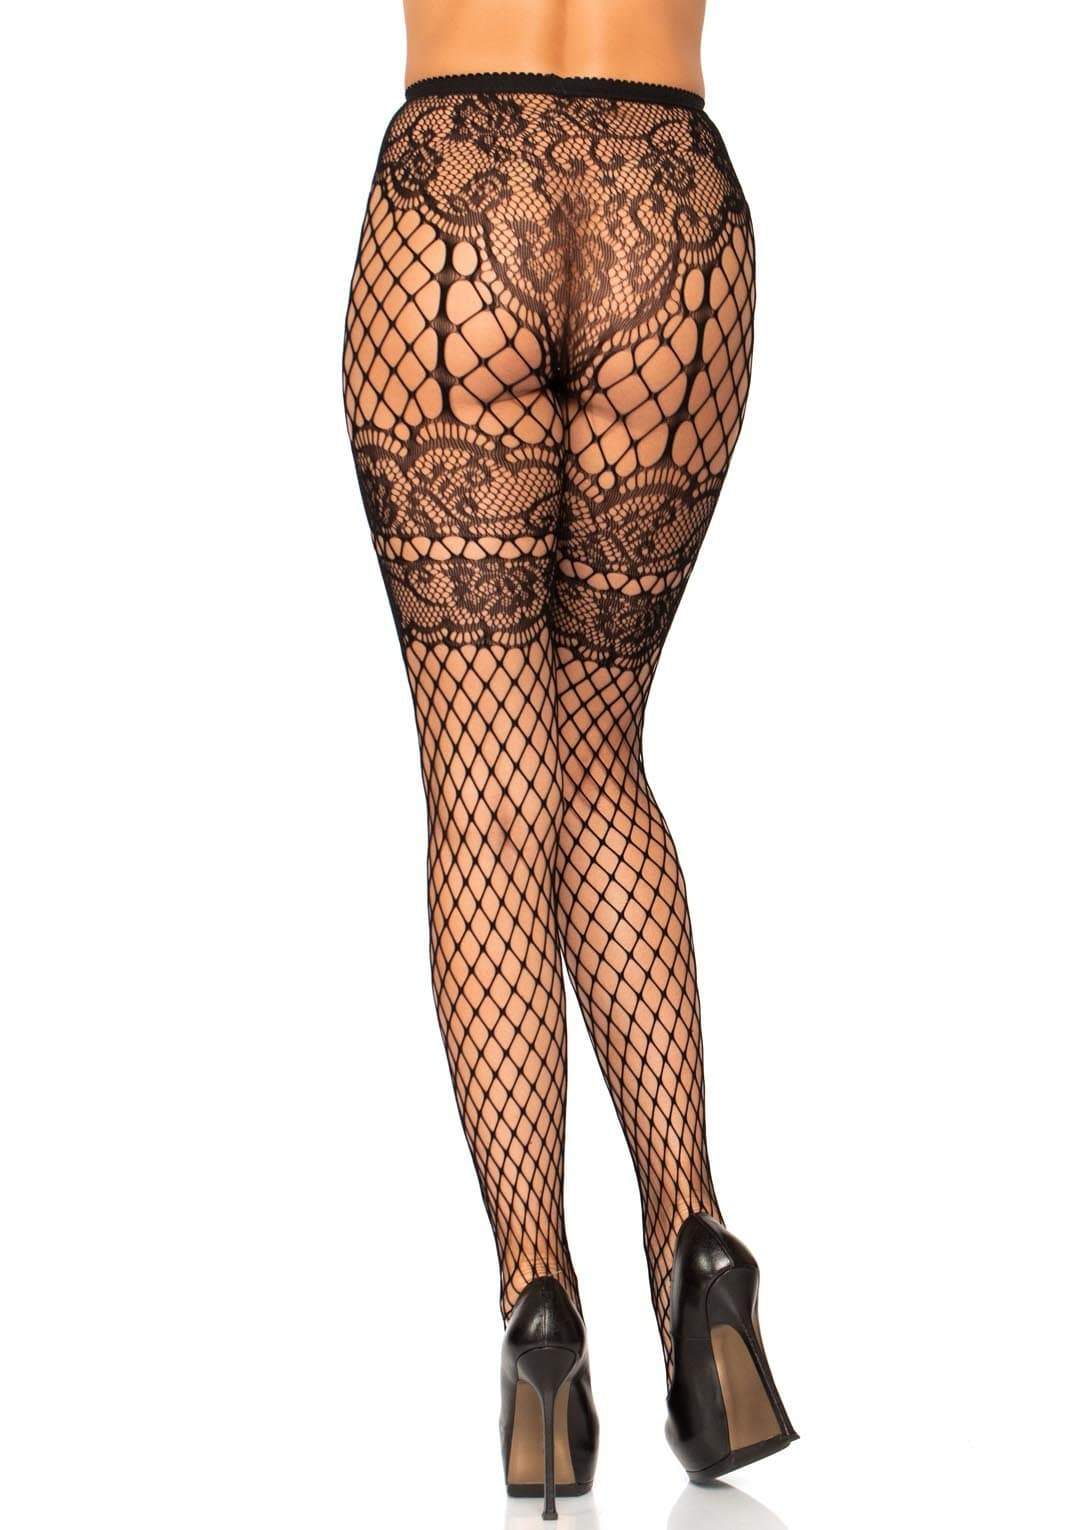 Lace French cut faux garter Industrial Net tights.